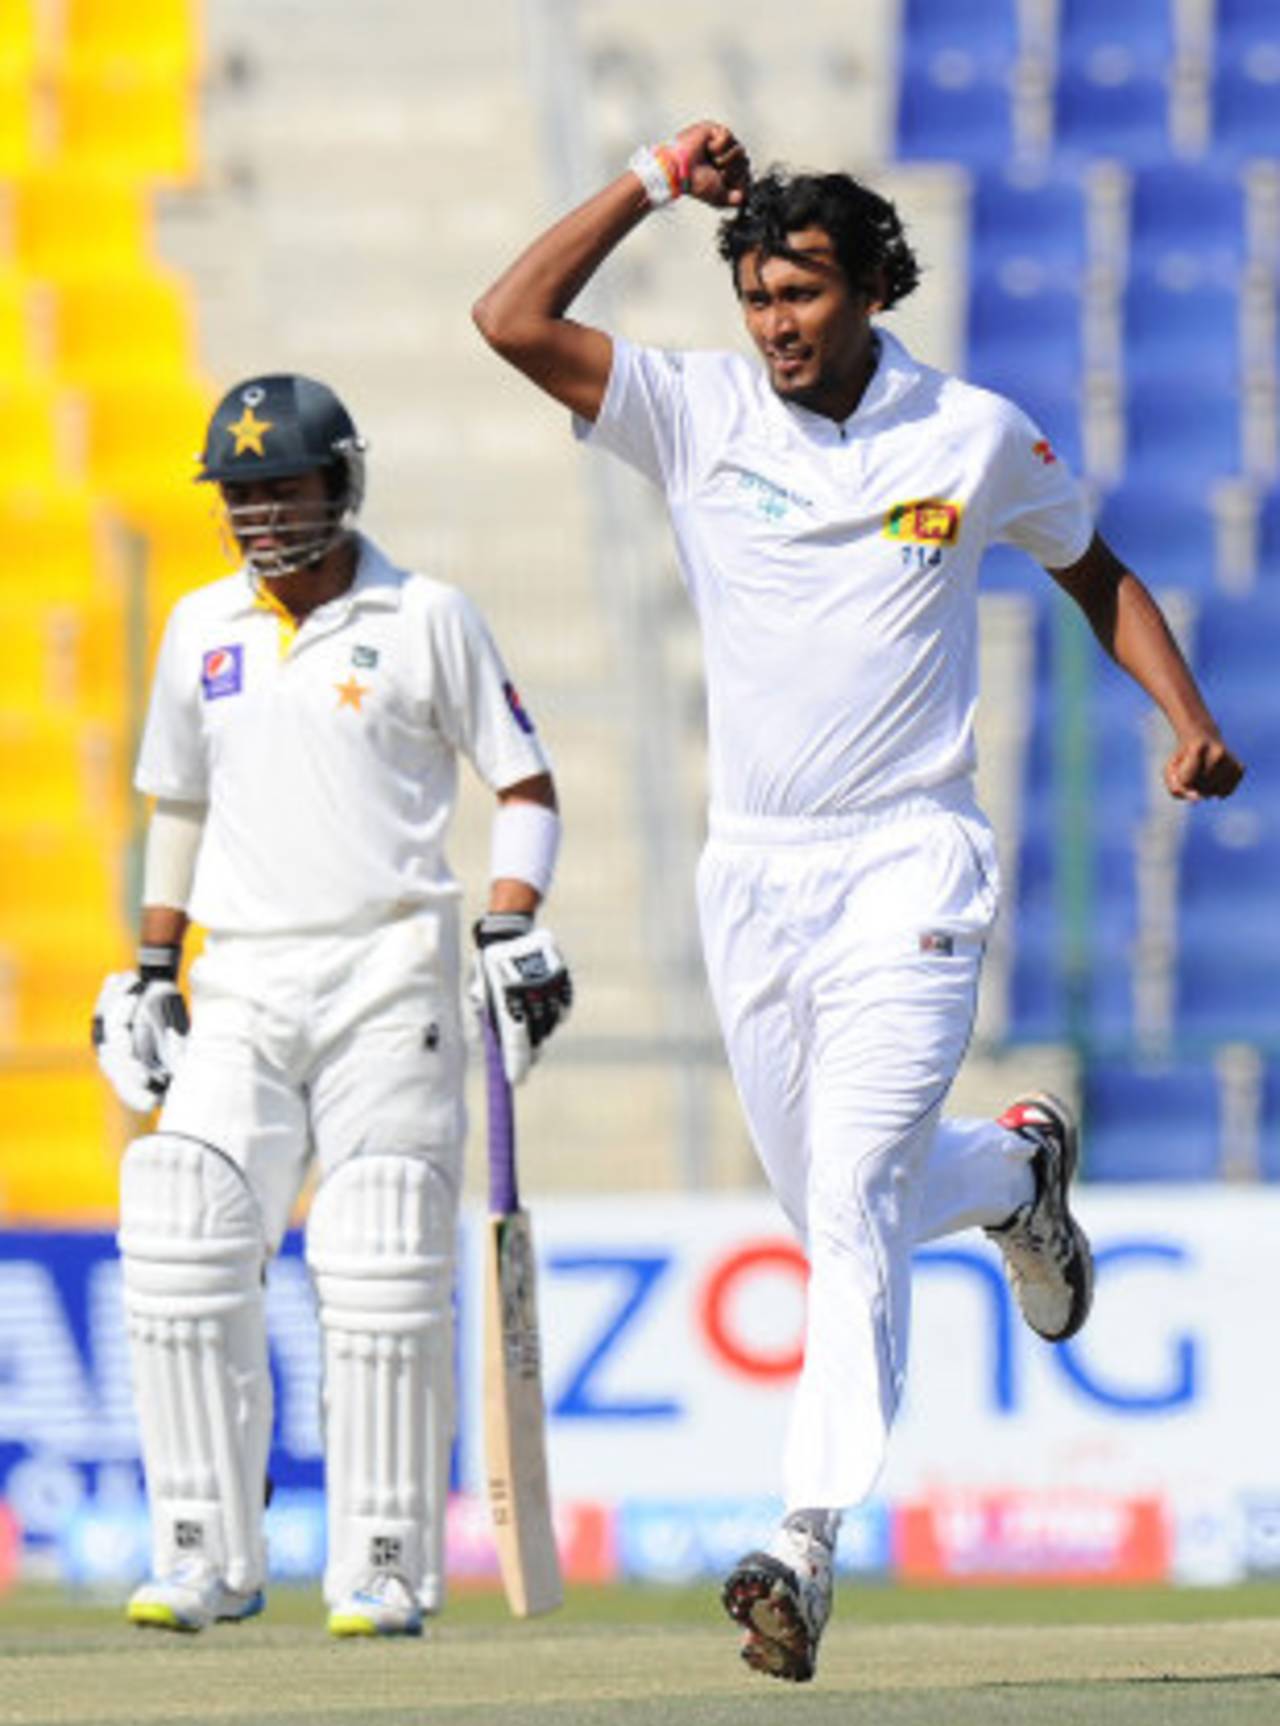 Suranga Lakmal had a good workload, bowling 46 overs in the match and his captain was pleased&nbsp;&nbsp;&bull;&nbsp;&nbsp;AFP